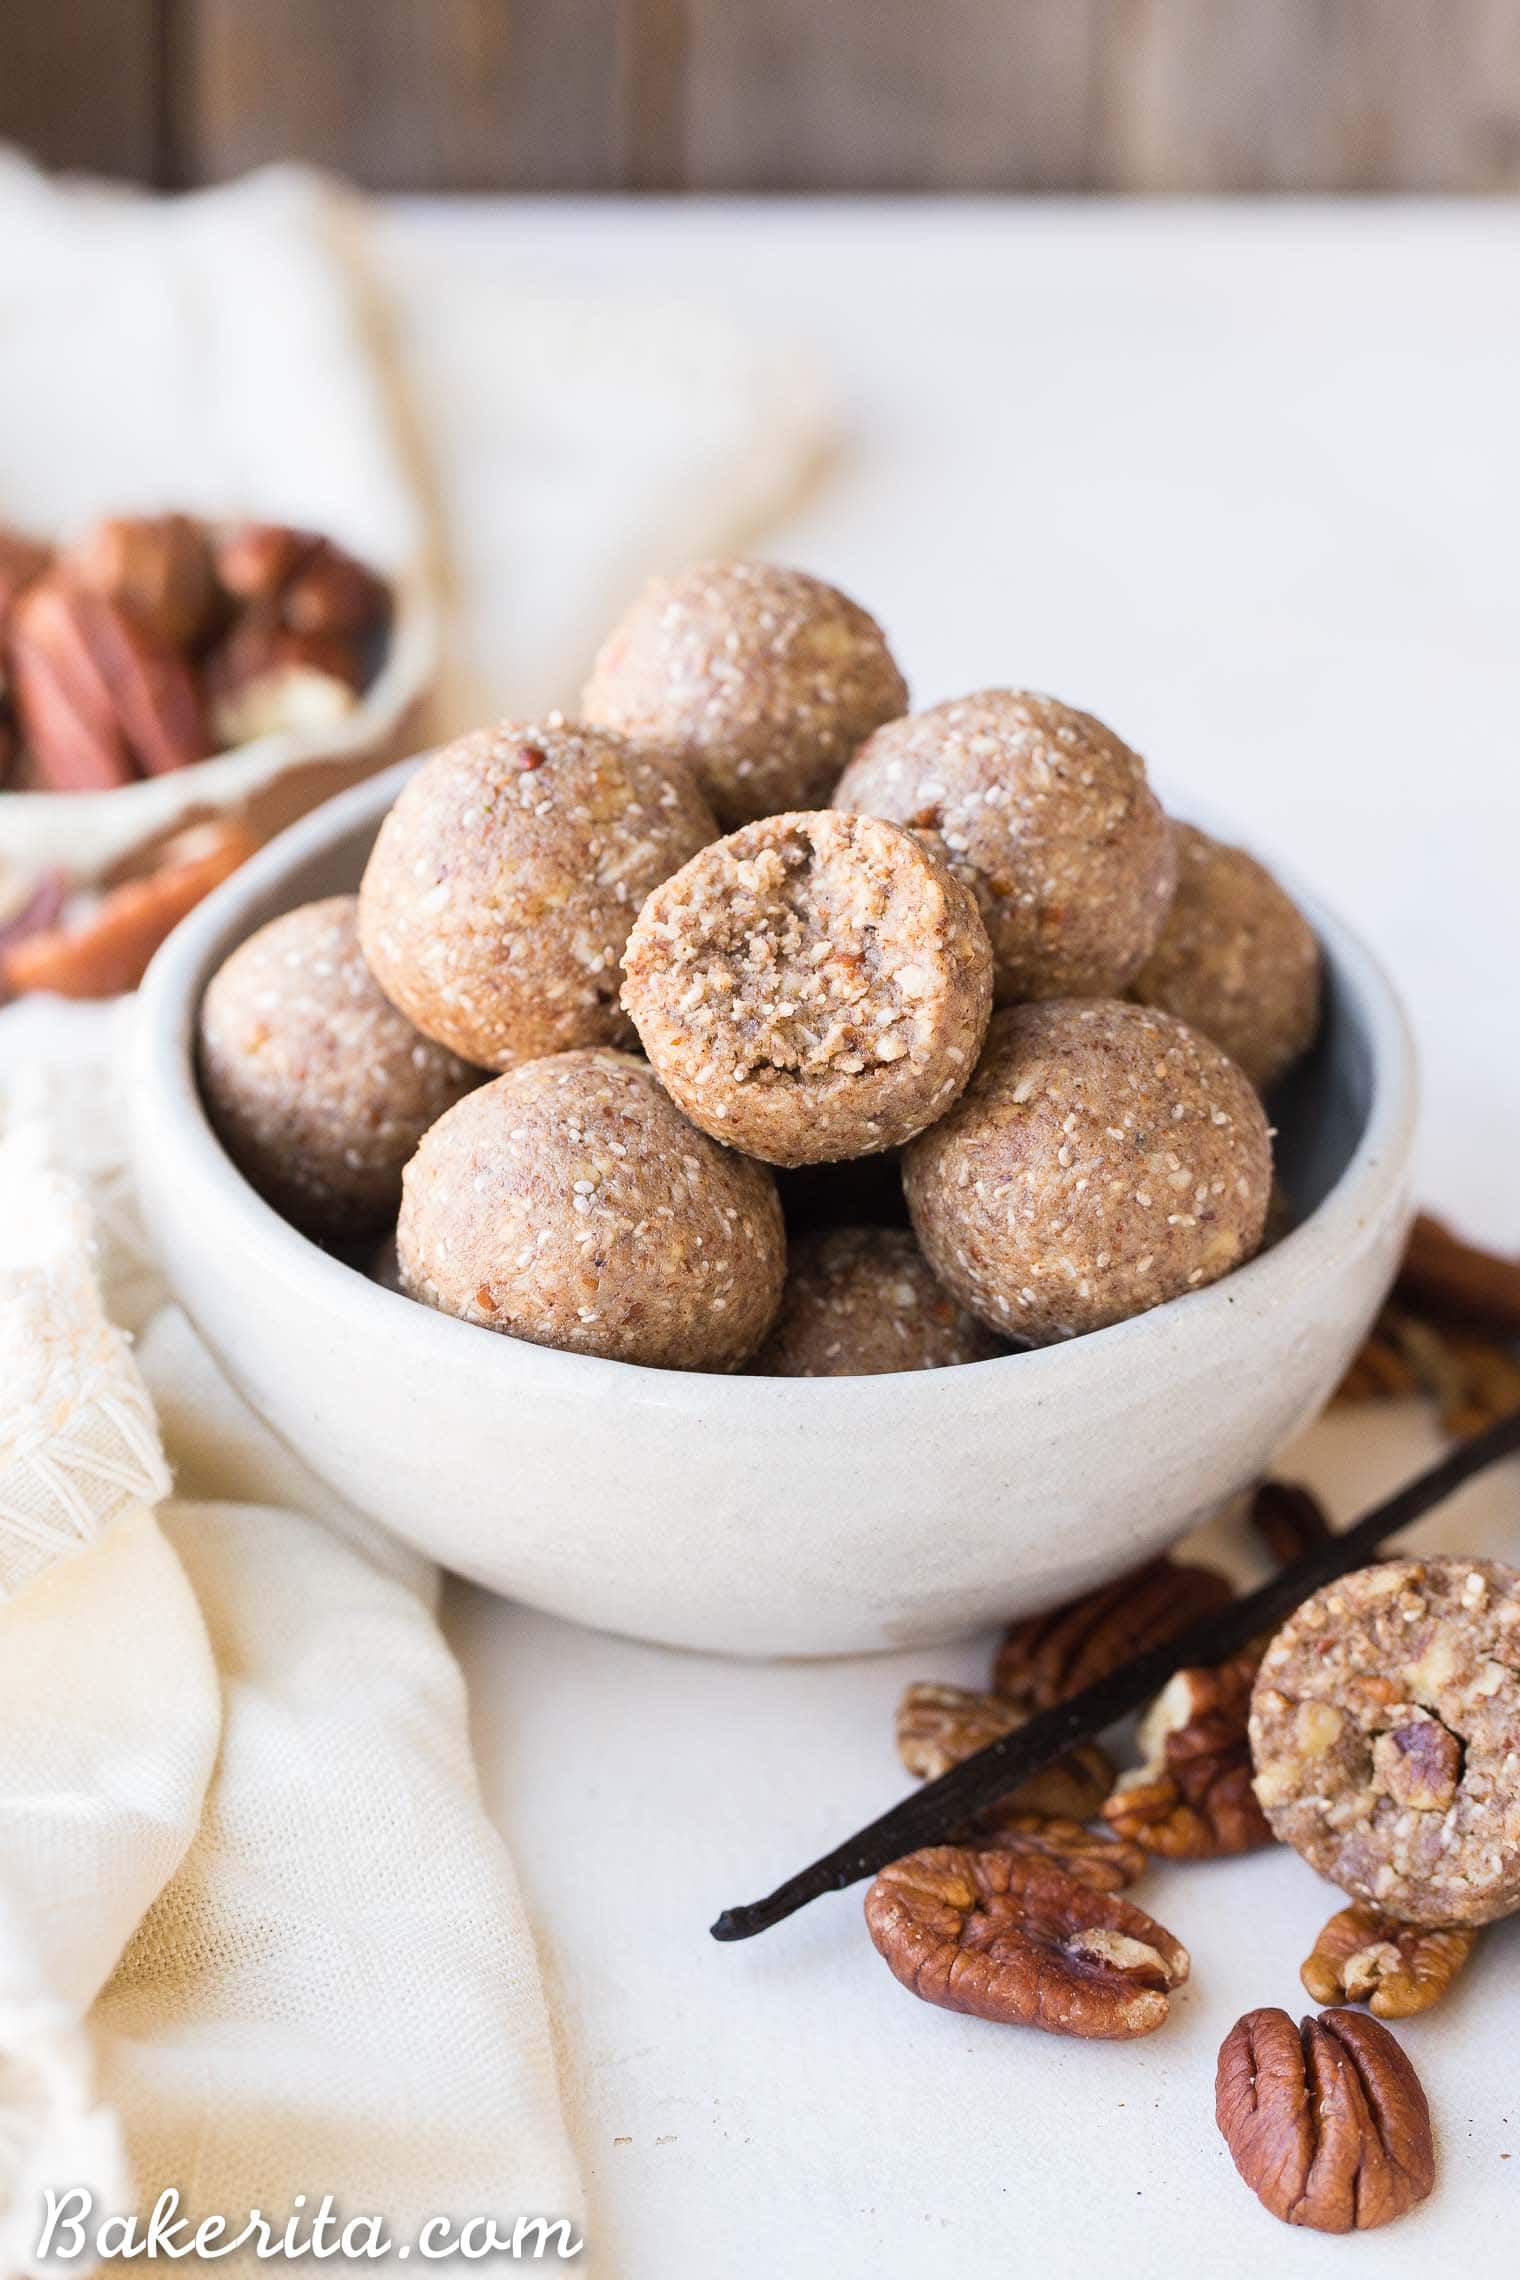 These Pecan Pie Fat Bombs are a super filling nutritional powerhouse, with loads of healthy fats and protein, and no sugar needed! These fat bombs full of vanilla bean and buttery pecans, and they're gluten-free, paleo, vegan, keto, and Whole30-approved.